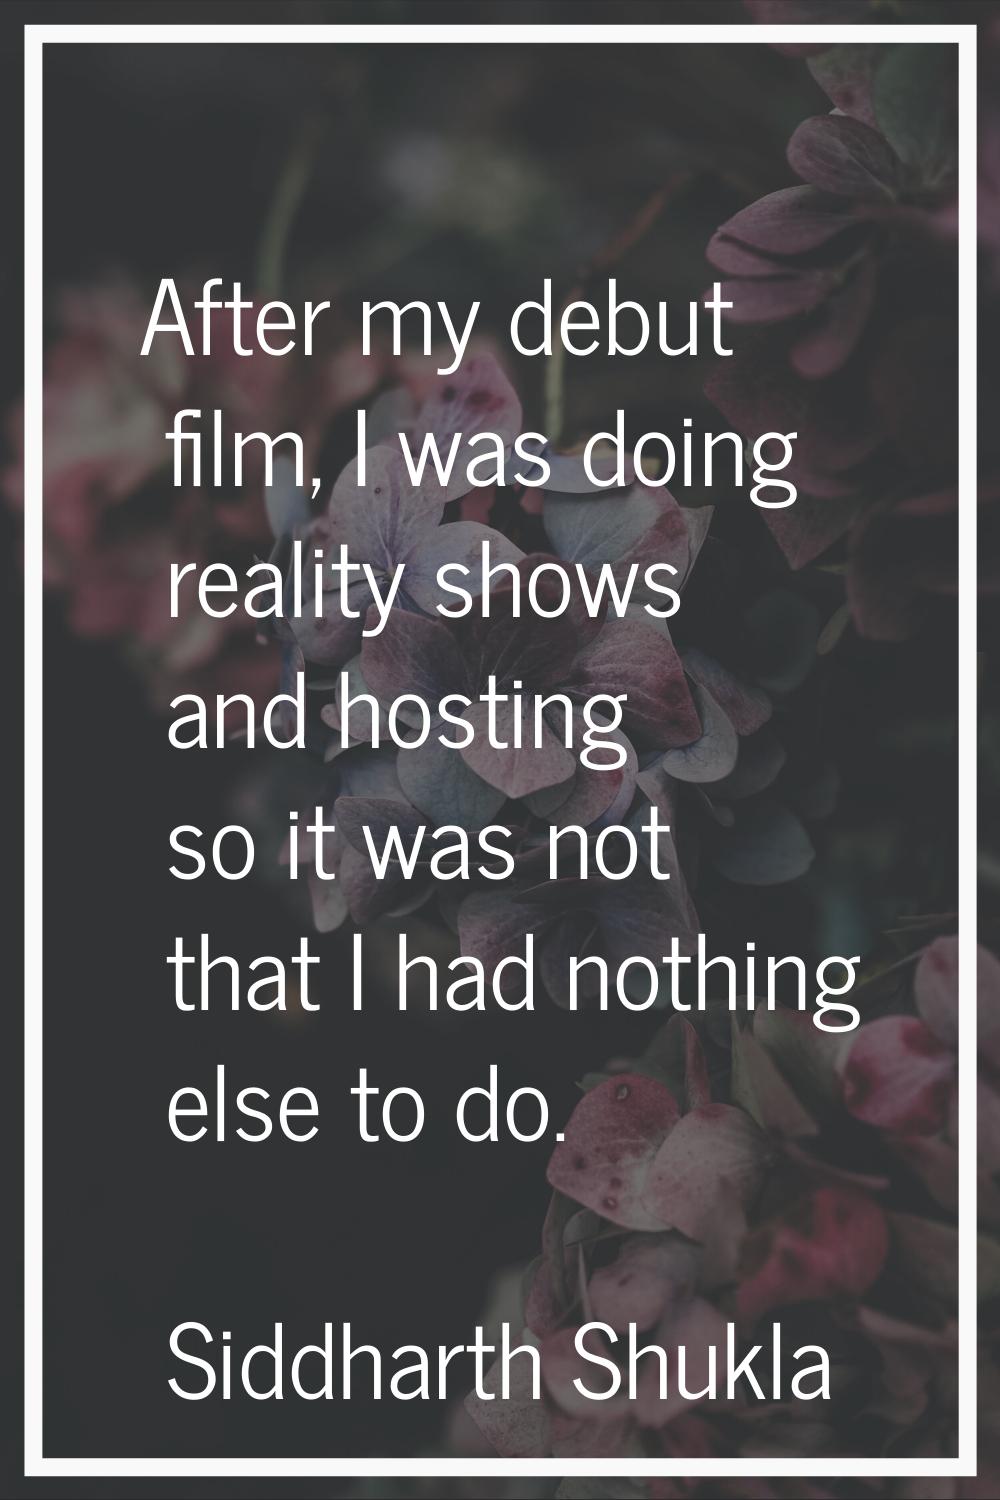 After my debut film, I was doing reality shows and hosting so it was not that I had nothing else to